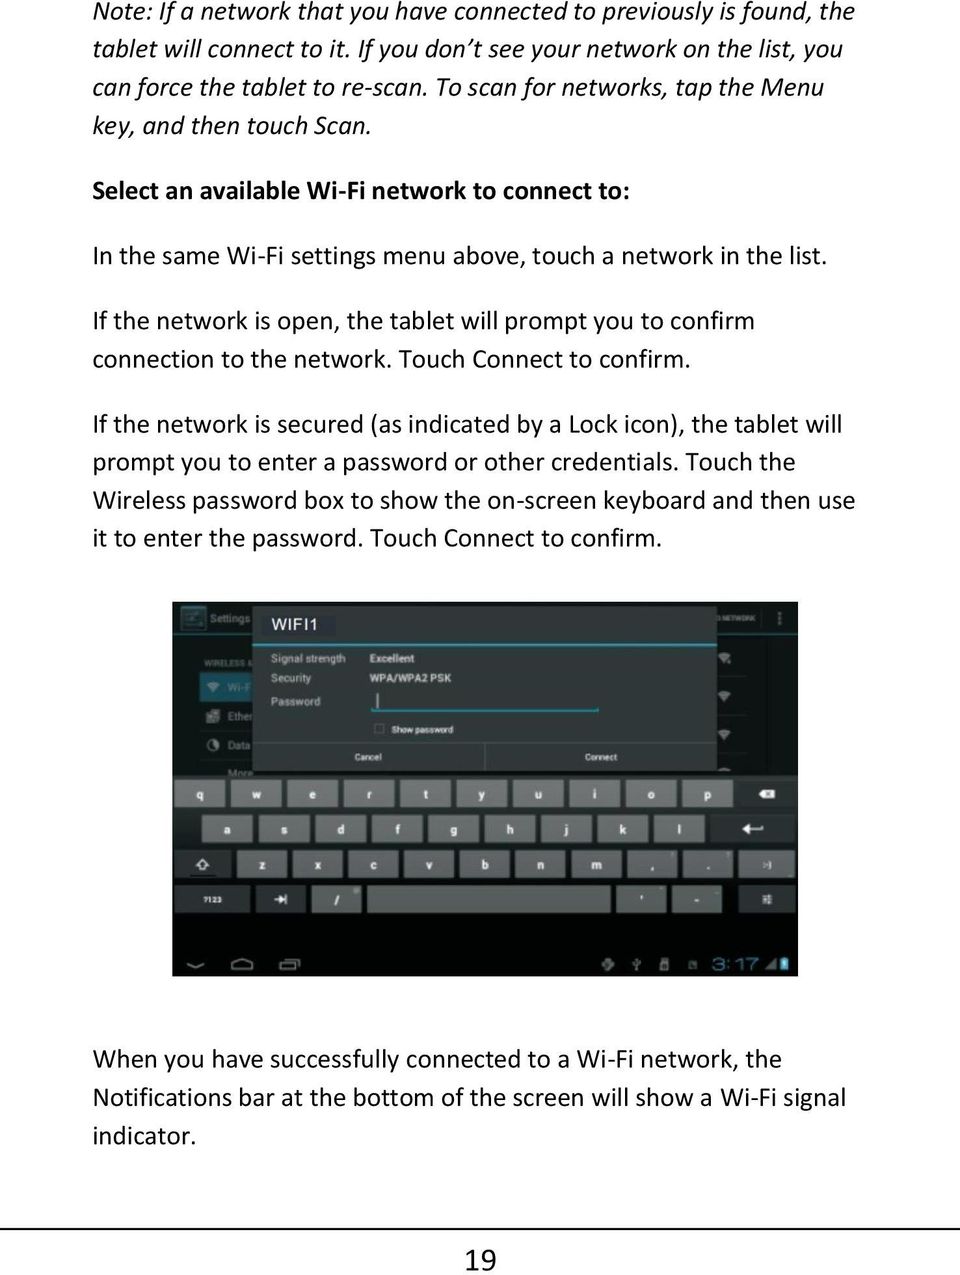 If the network is open, the tablet will prompt you to confirm connection to the network. Touch Connect to confirm.